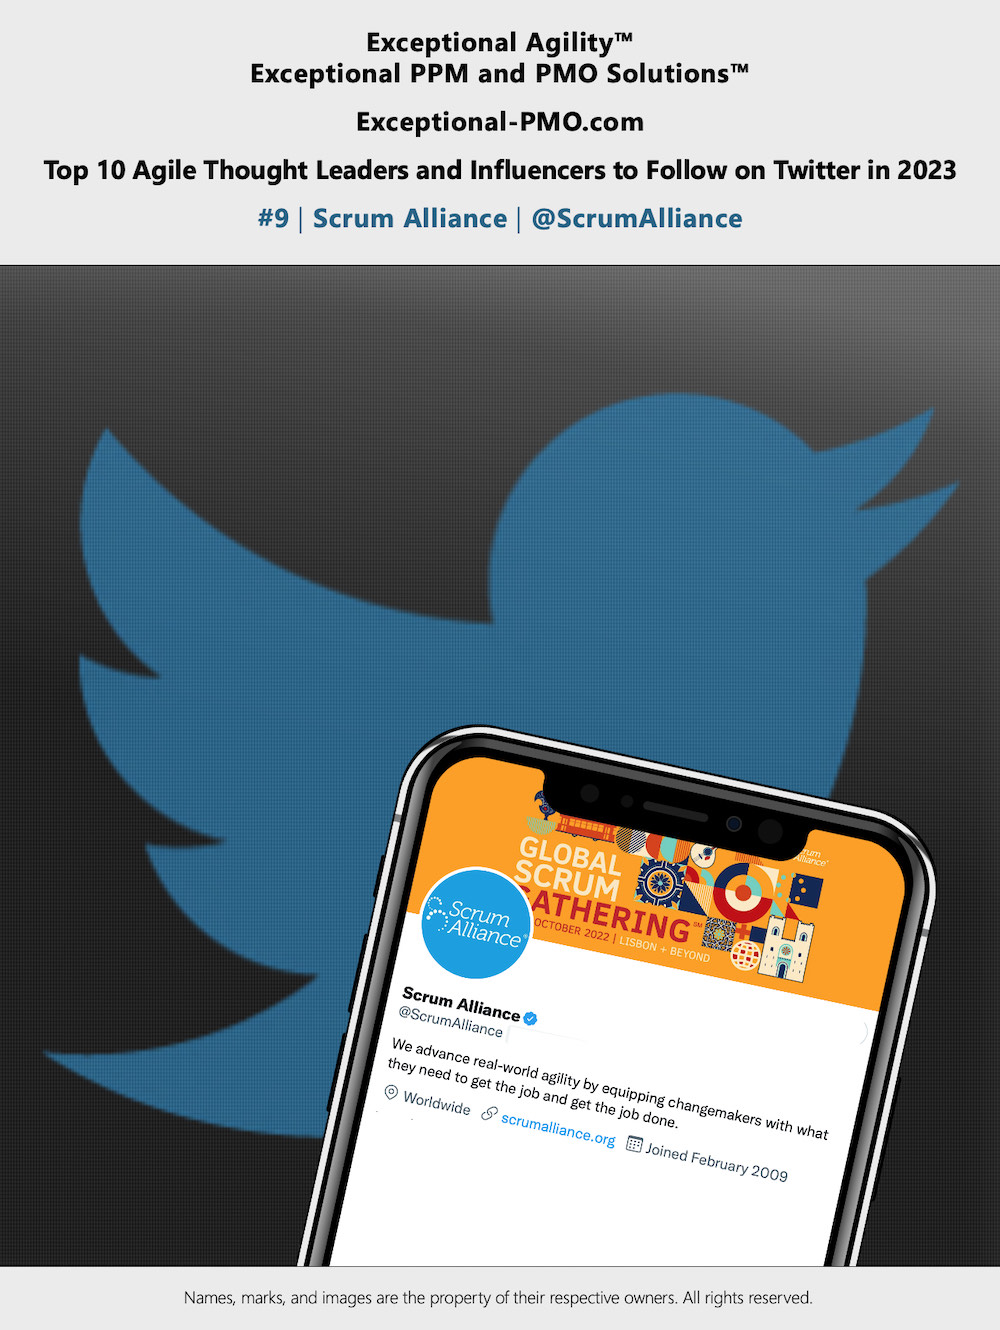 Exceptional-PMO_com - Top 10 Agile Thought Leaders and Influencers to Follow on Twitter in 2023 - 09 - lr - sq